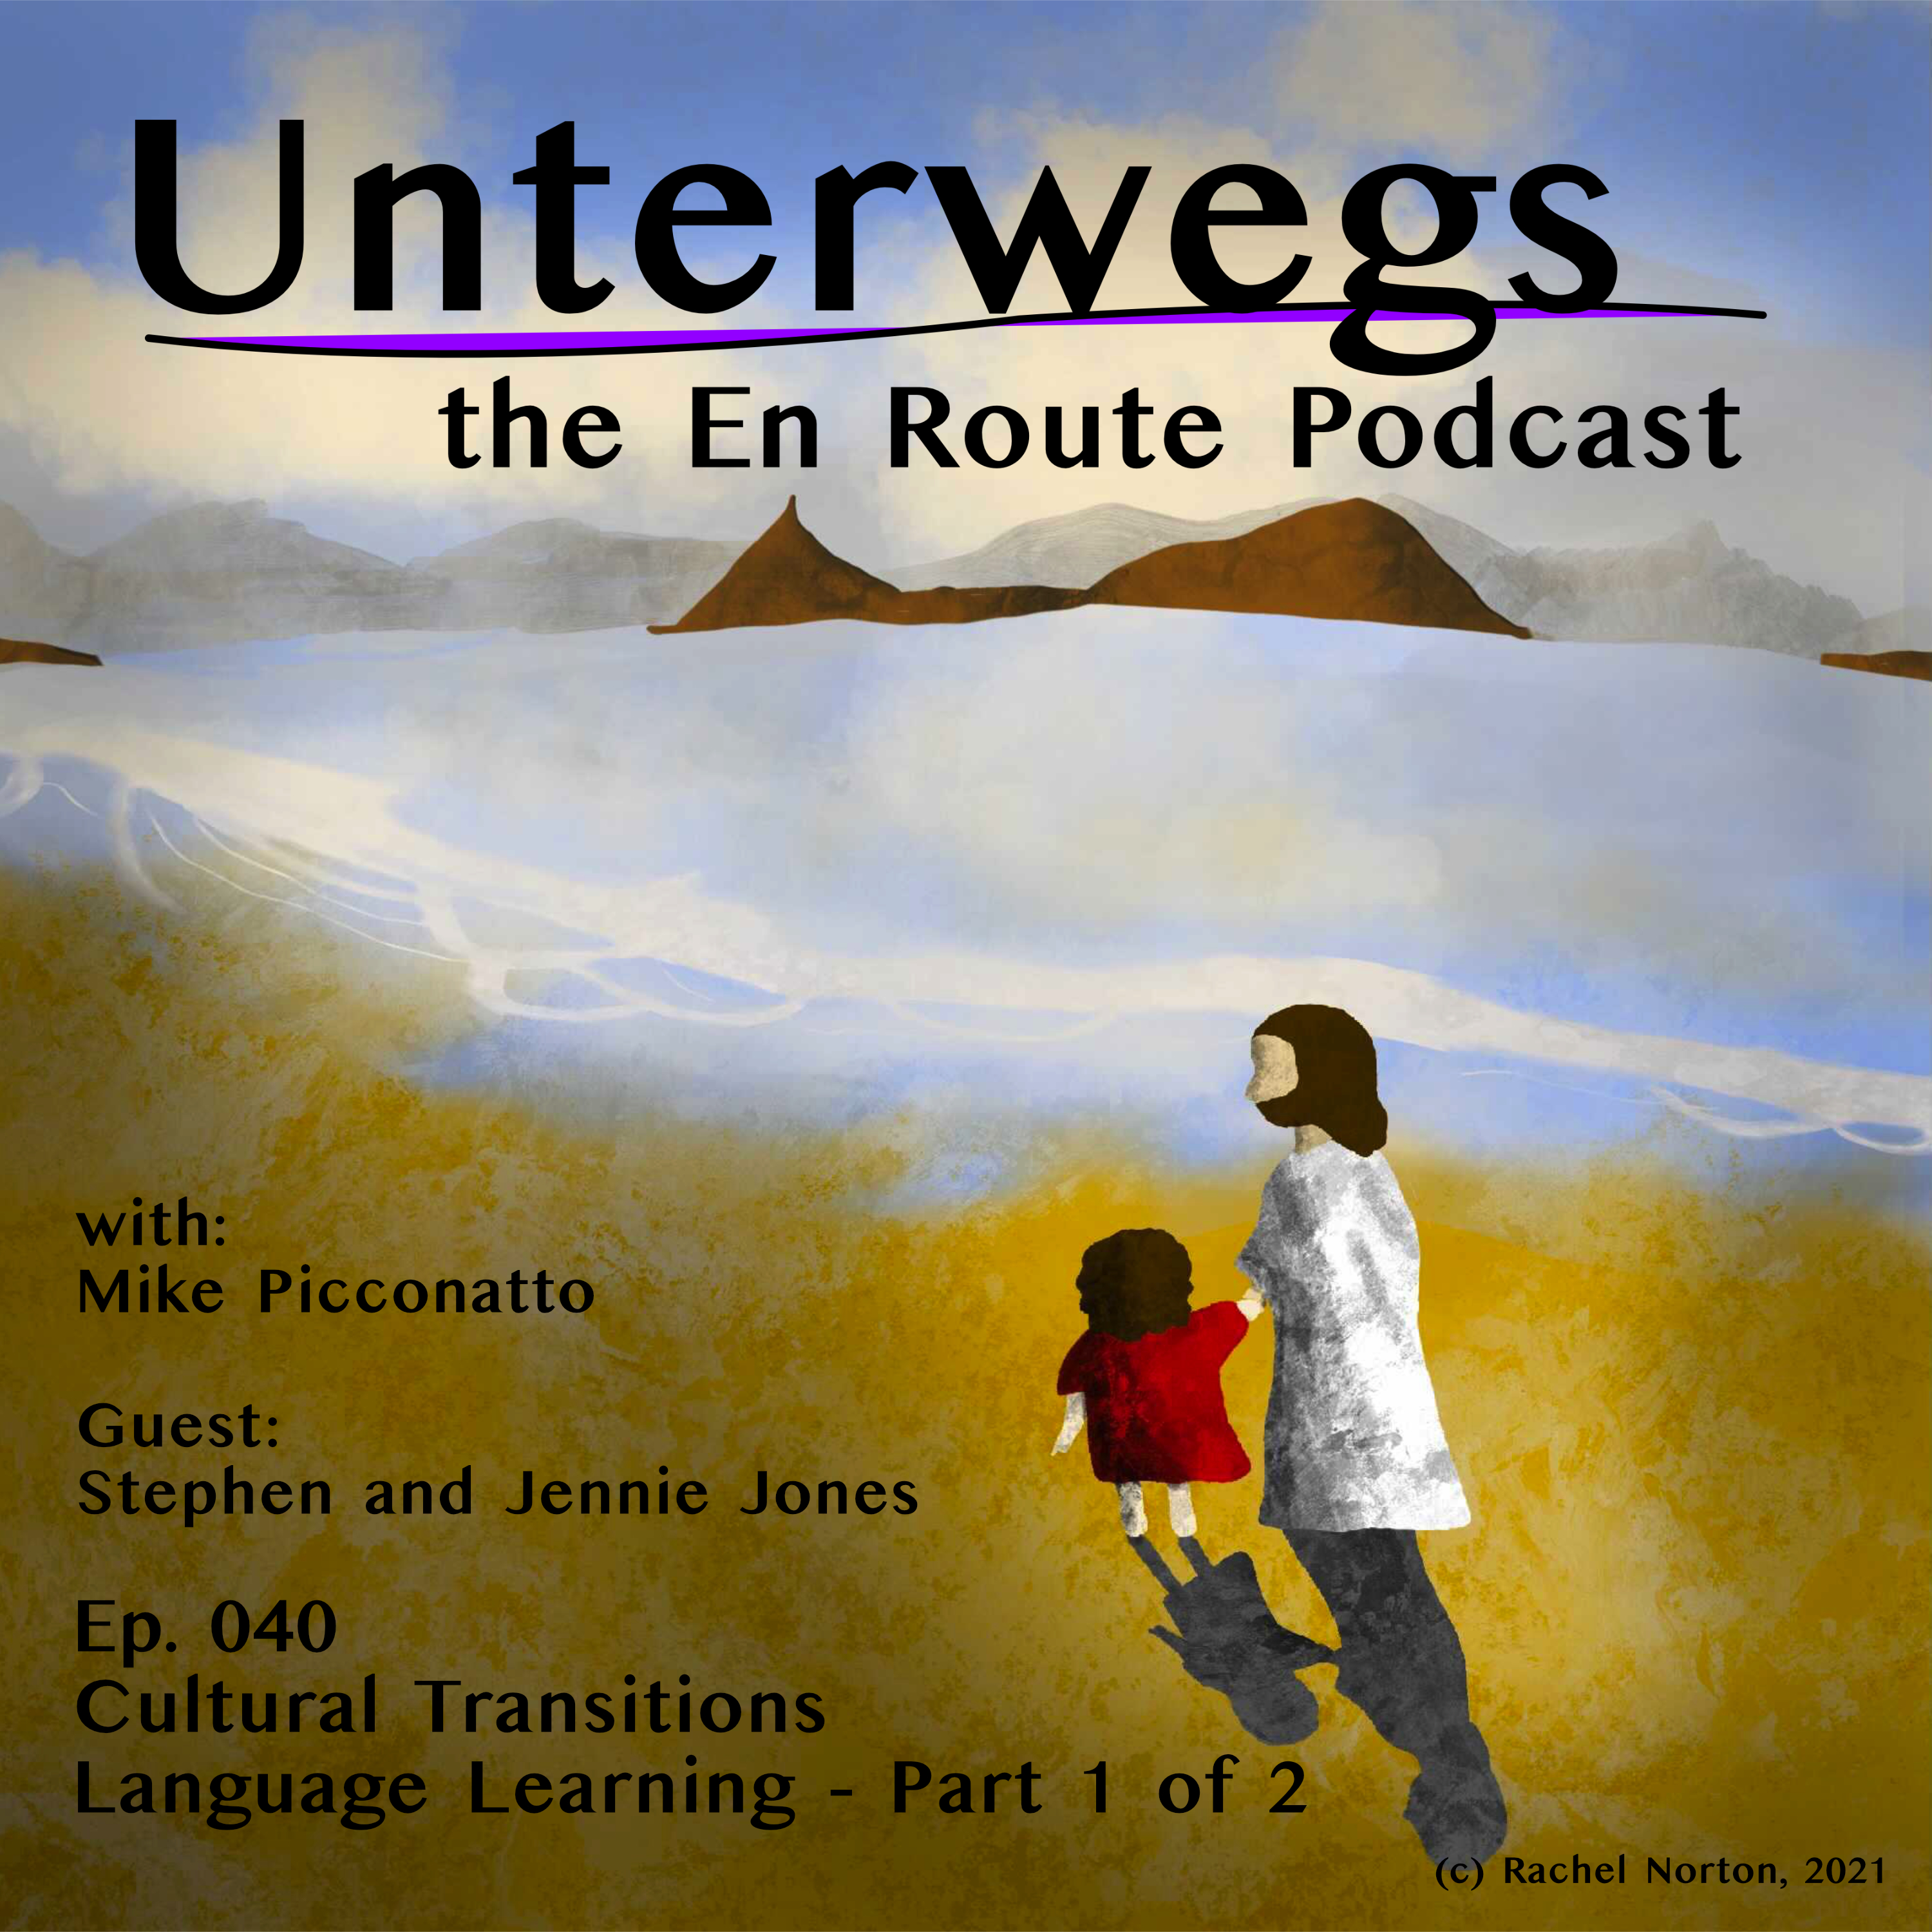 Episode 40 - Cultural Transitions - Language Learning - Part 1 of 2 